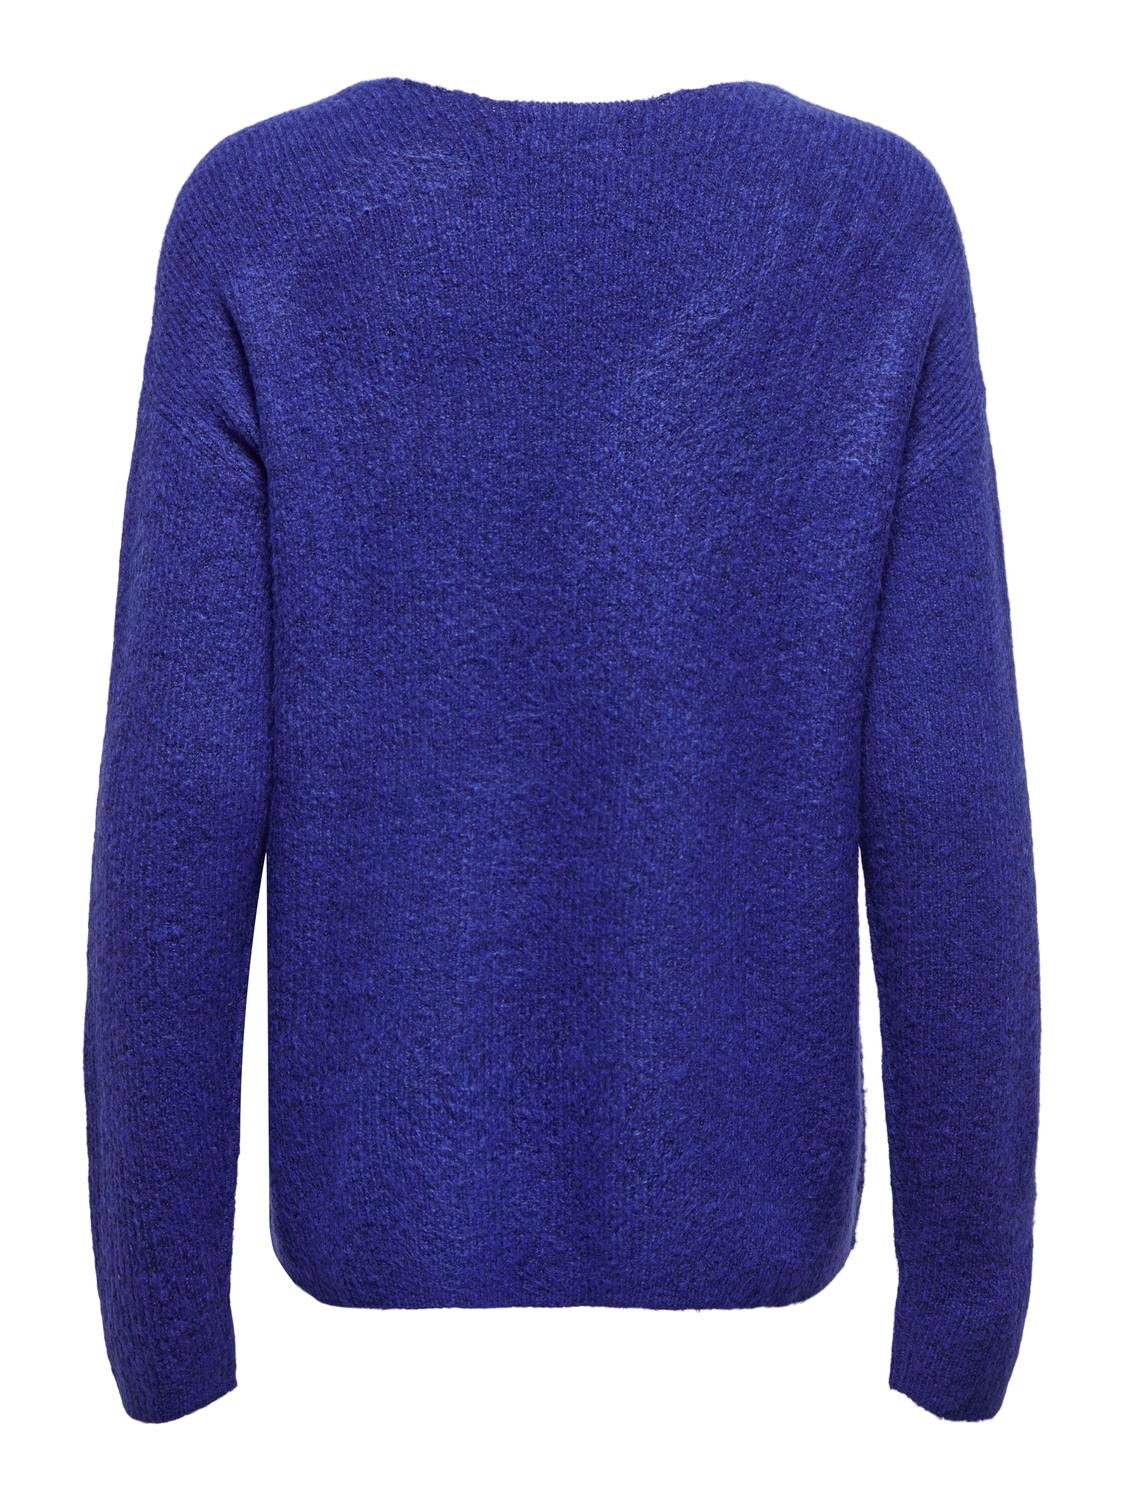 ONLY Regular Fit V-Neck Ribbed cuffs Dropped shoulders Pullover -Bluing - 15204588